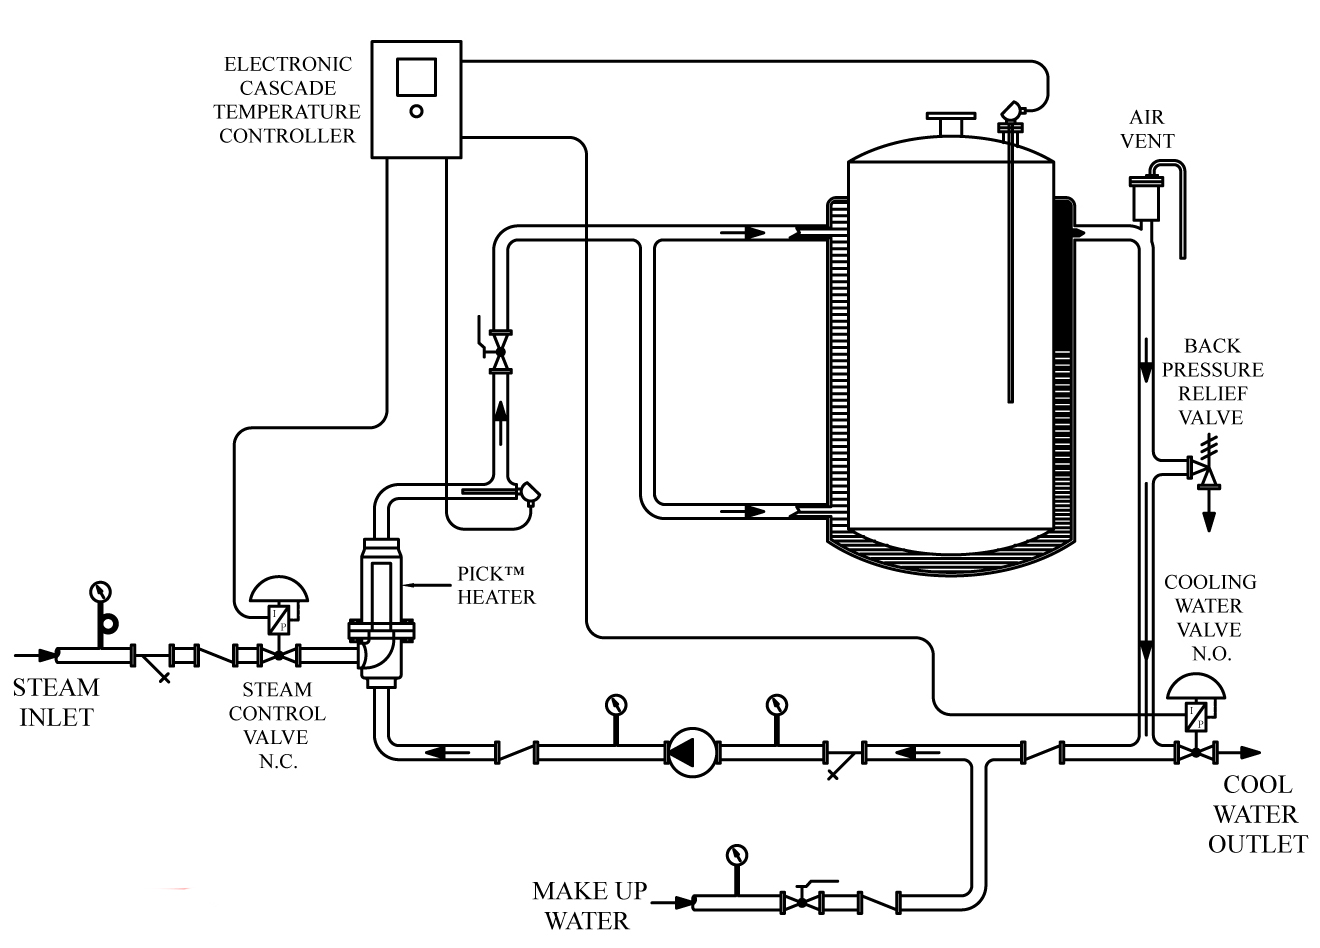 Improve Jacketed Heating Systems With Direct Steam Injection